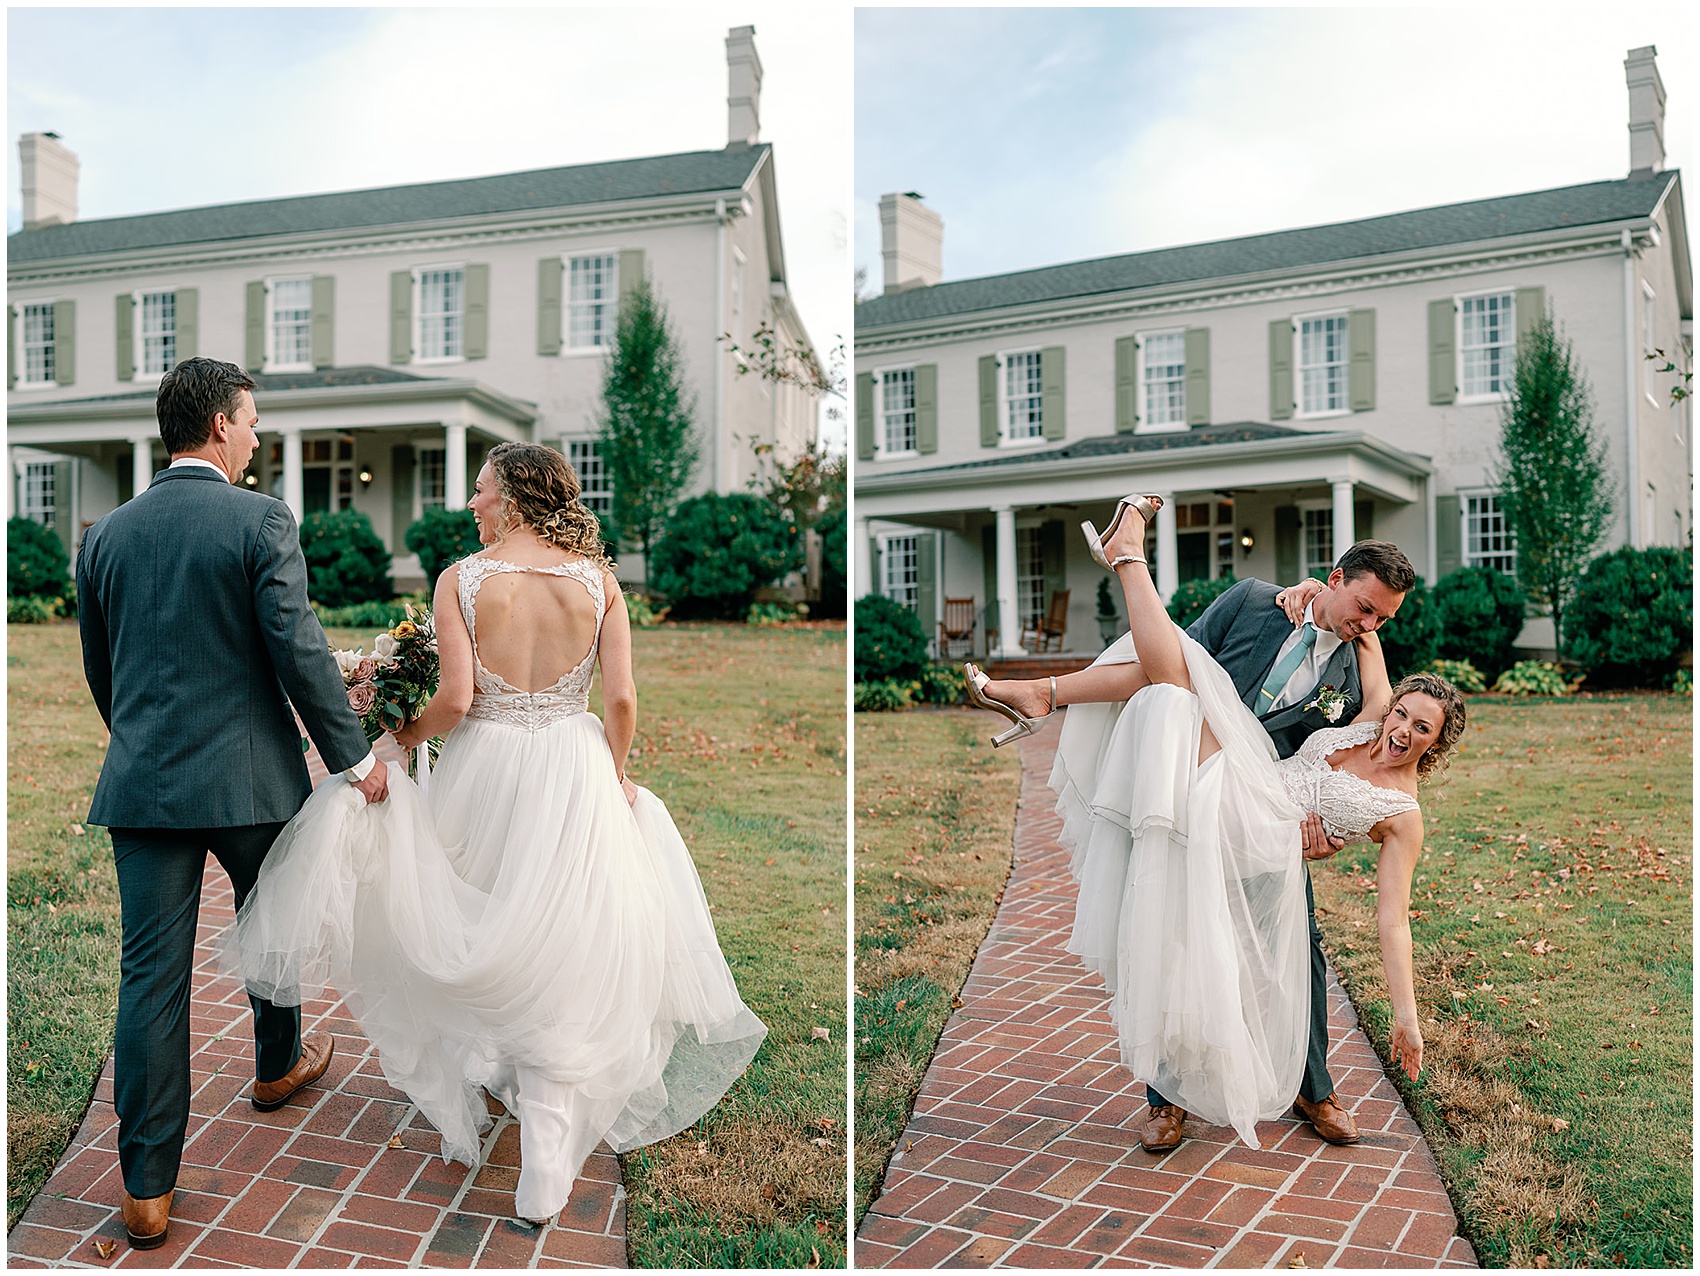 Newlyweds walk and play on the front brick path in front of the maple grove estate